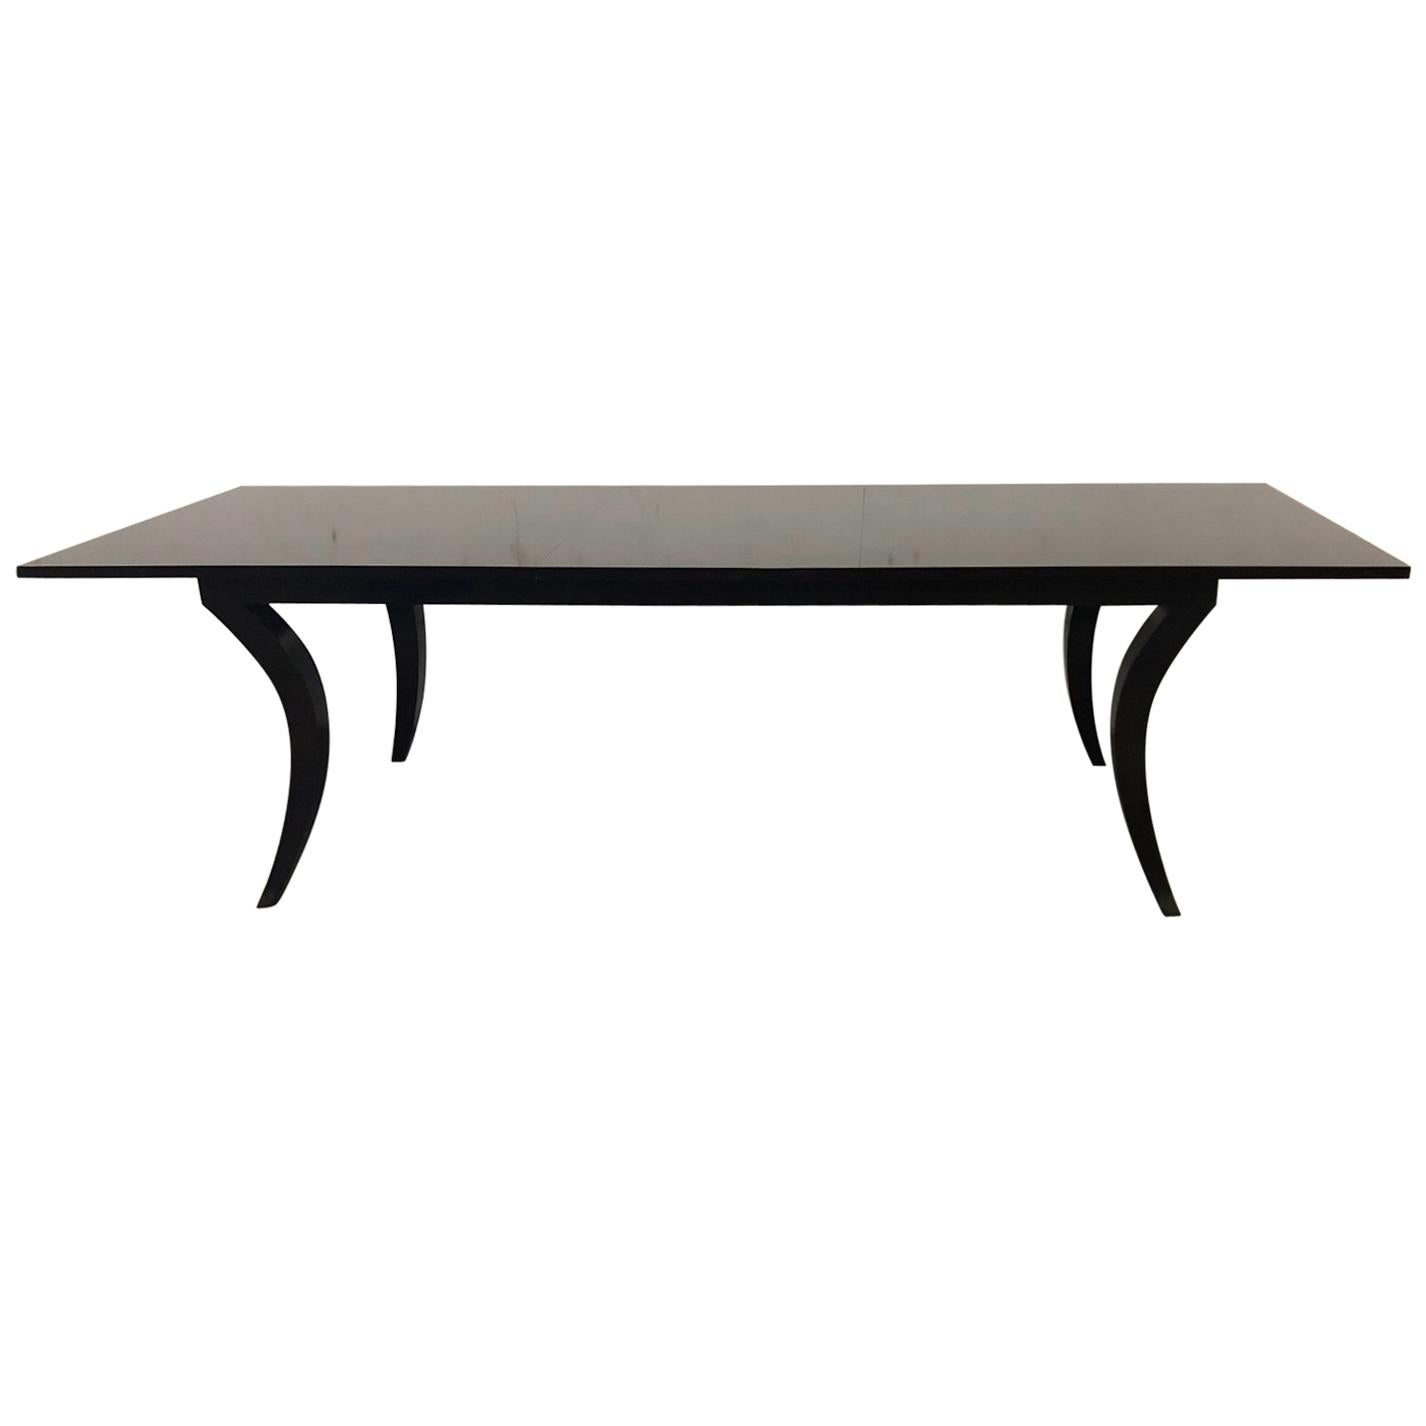 Transitional Sabre Leg Dining Table For Sale